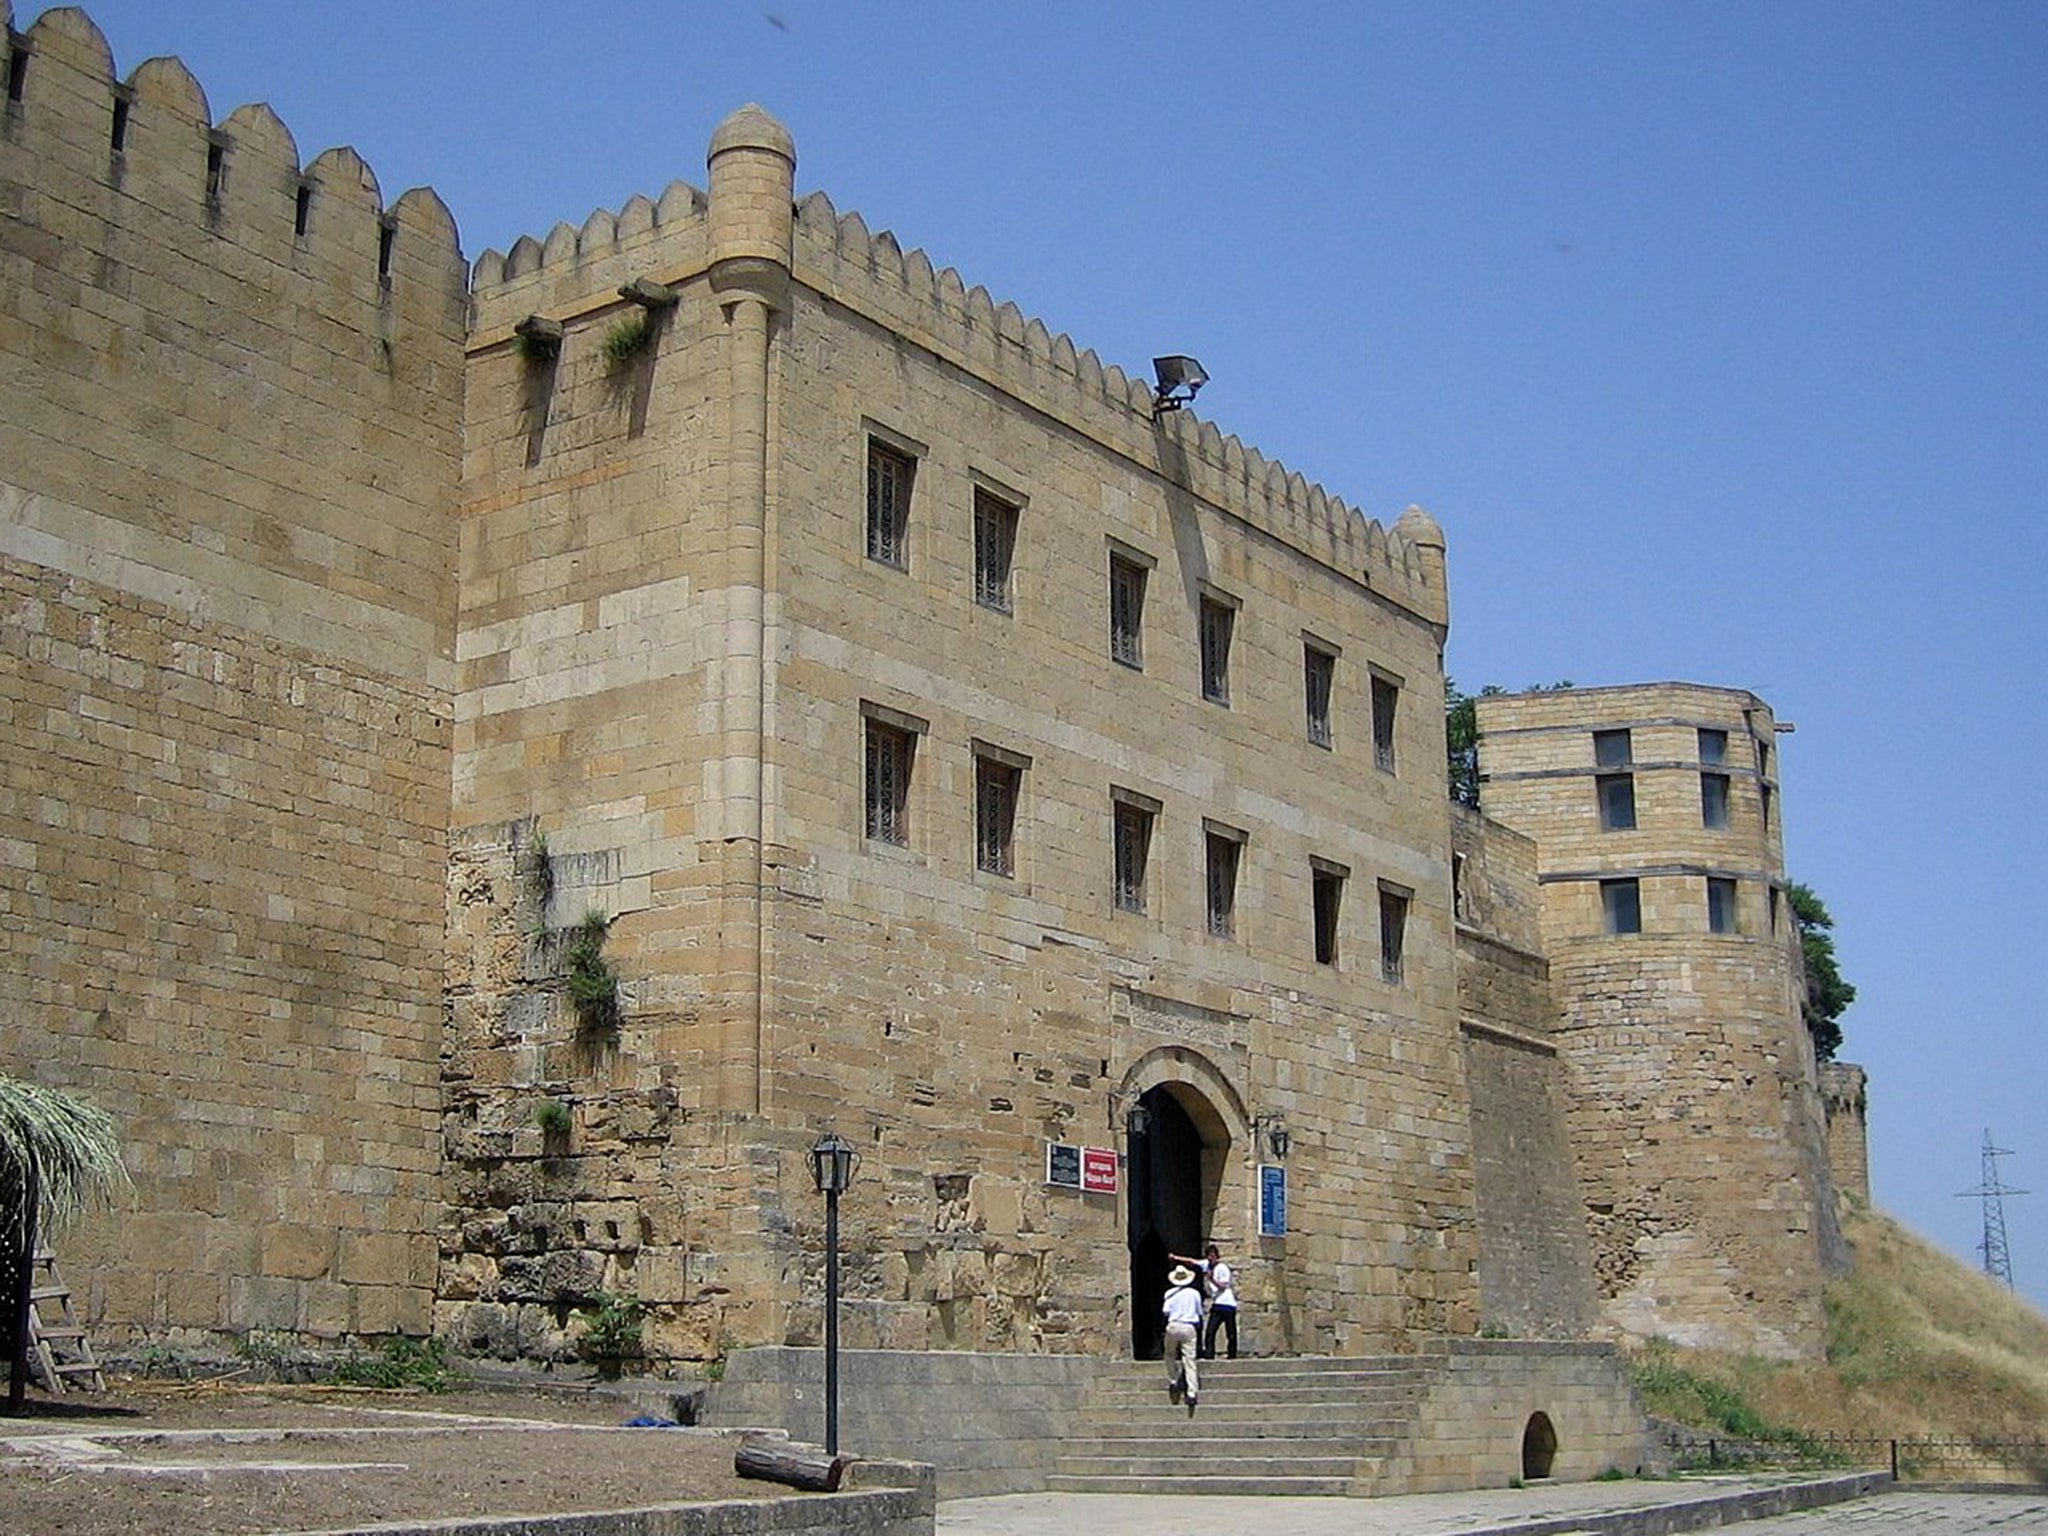 The Citadel of Derbent and its surrounding Naryn-Kala fortress is listed as a UNESCO world heritage site